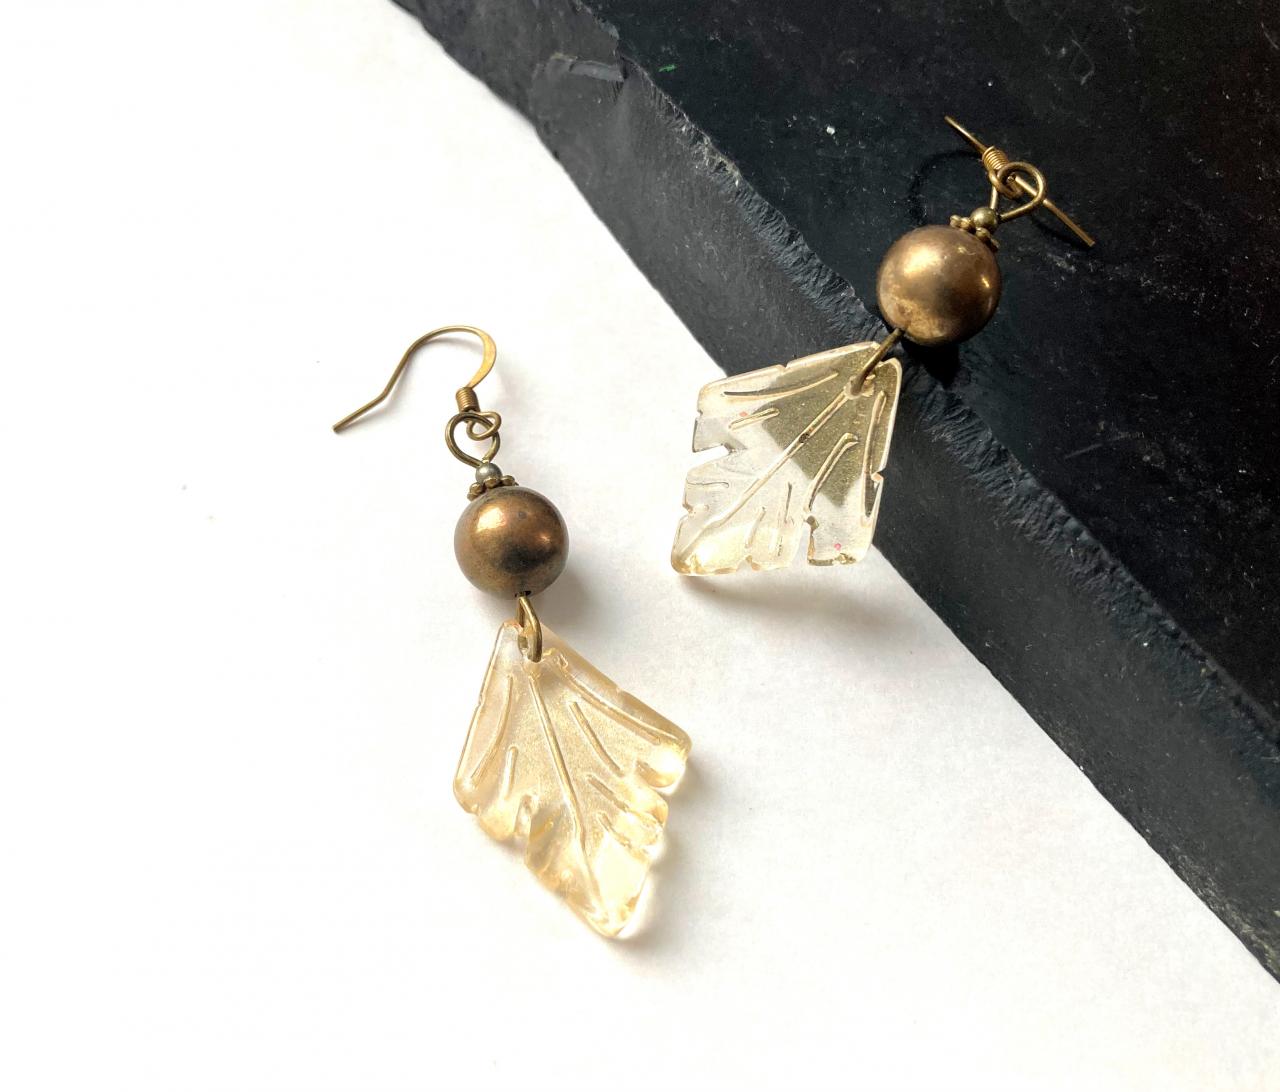 Art Nouveau Earrings With Recycled Beads And Glass Gold Leaf Pendants, Selma Dreams